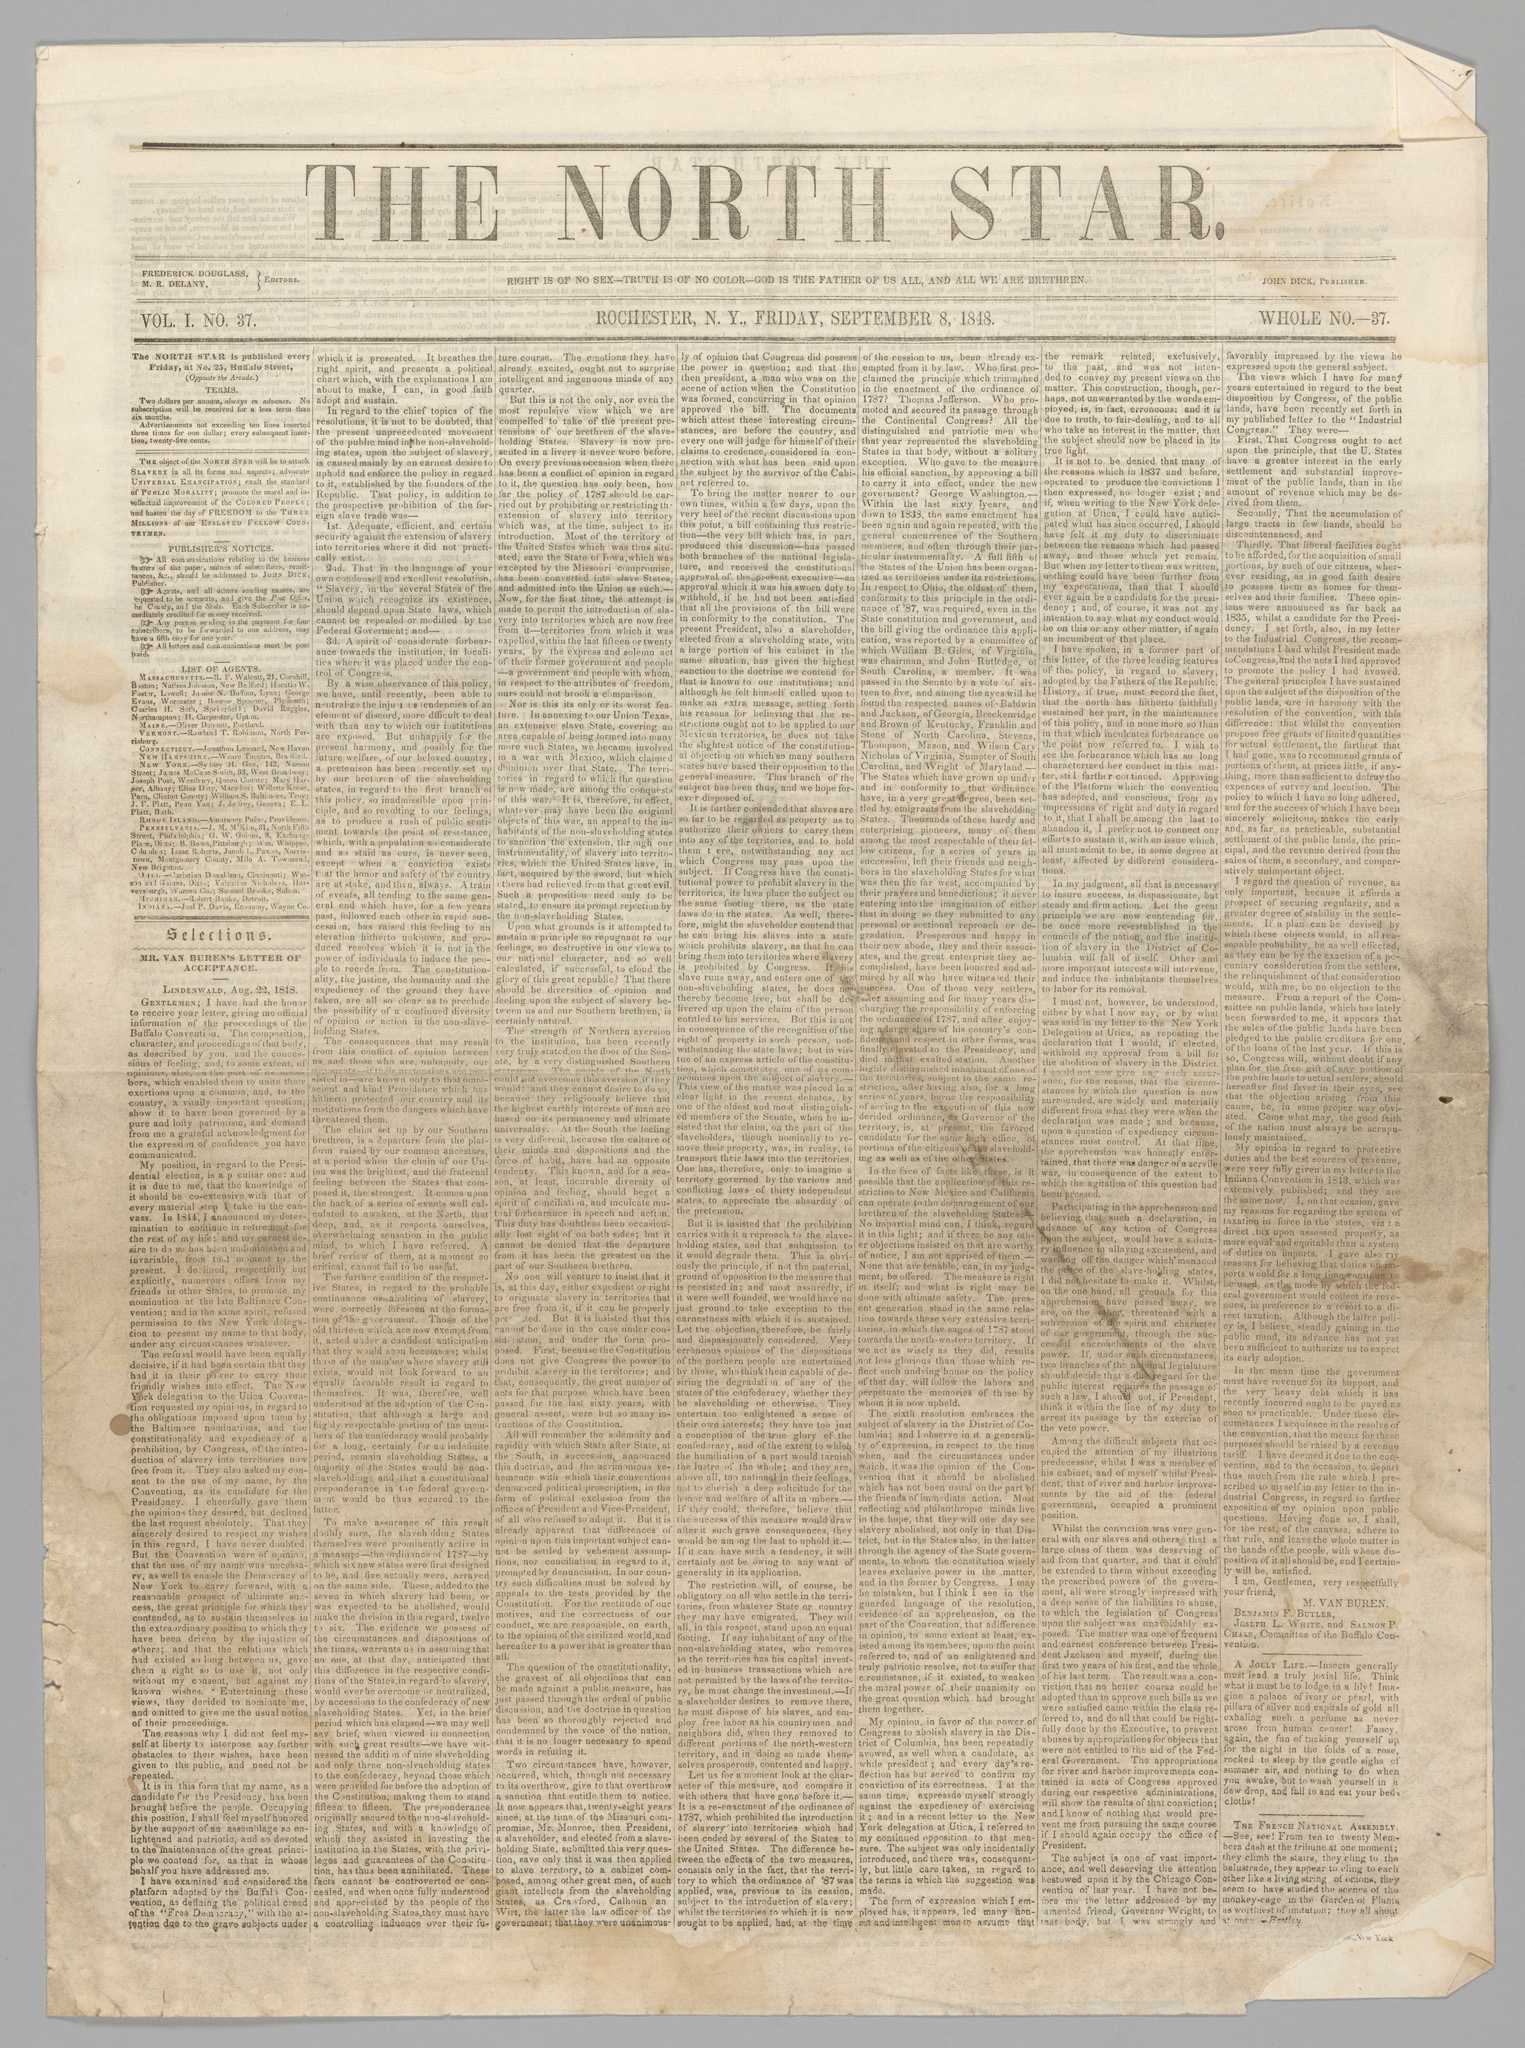 The September 8, 1848 issue of the North Star, an antislavery newspaper published in Rochester, New York by Frederick Douglass. The paper is printed with black text on yellowed newsprint. The masthead reads [THE NORTH STAR. / RIGHT IS OF NO SEX-TRUTH IS OF NO COLOR-GOD IS THE FATHER OF US ALL, AND ALL WE ARE BRETHREN. / ROCHESTER, N. Y., FRIDAY, SEPTEMBER 8, 1848.] On the left side of the masthead is [FREDERICK DOUGLASS, / M. R. DELANY, / EDITORS / VOL. 1. NO. 37.] Printed on the right side of the masthead is [JOHN DICK, PUBLISHER / WHOLE NO.-37.]. The main text is organized into seven columns of small print. At the top of the column on the far left, above the publisher's notices and list of agents, is printed: [The object of the NORTH STAR will be to attack SLAVERY in all its forms and aspects; advocate UNIVERSAL EMANCIPATION; exalt the standard of PUBLIC MORALITY; promote the moral and intellectual improvement of the COLORED PEOPLE; and hasten the day of FREEDOM to the THREE MILLIONS of our ENSLAVED FELLOW COUNTRYMEN.] This issue contains several anti-slavery essays and letters, including a letter from Douglass to his previous enslaver Thomas Auld, titled [To My Old Master], as well as a critique of the Liberian colonization movement, news of the rebellion in Ireland, poetry, notices of anti-slavery society meetings around the region, and general advertisements.